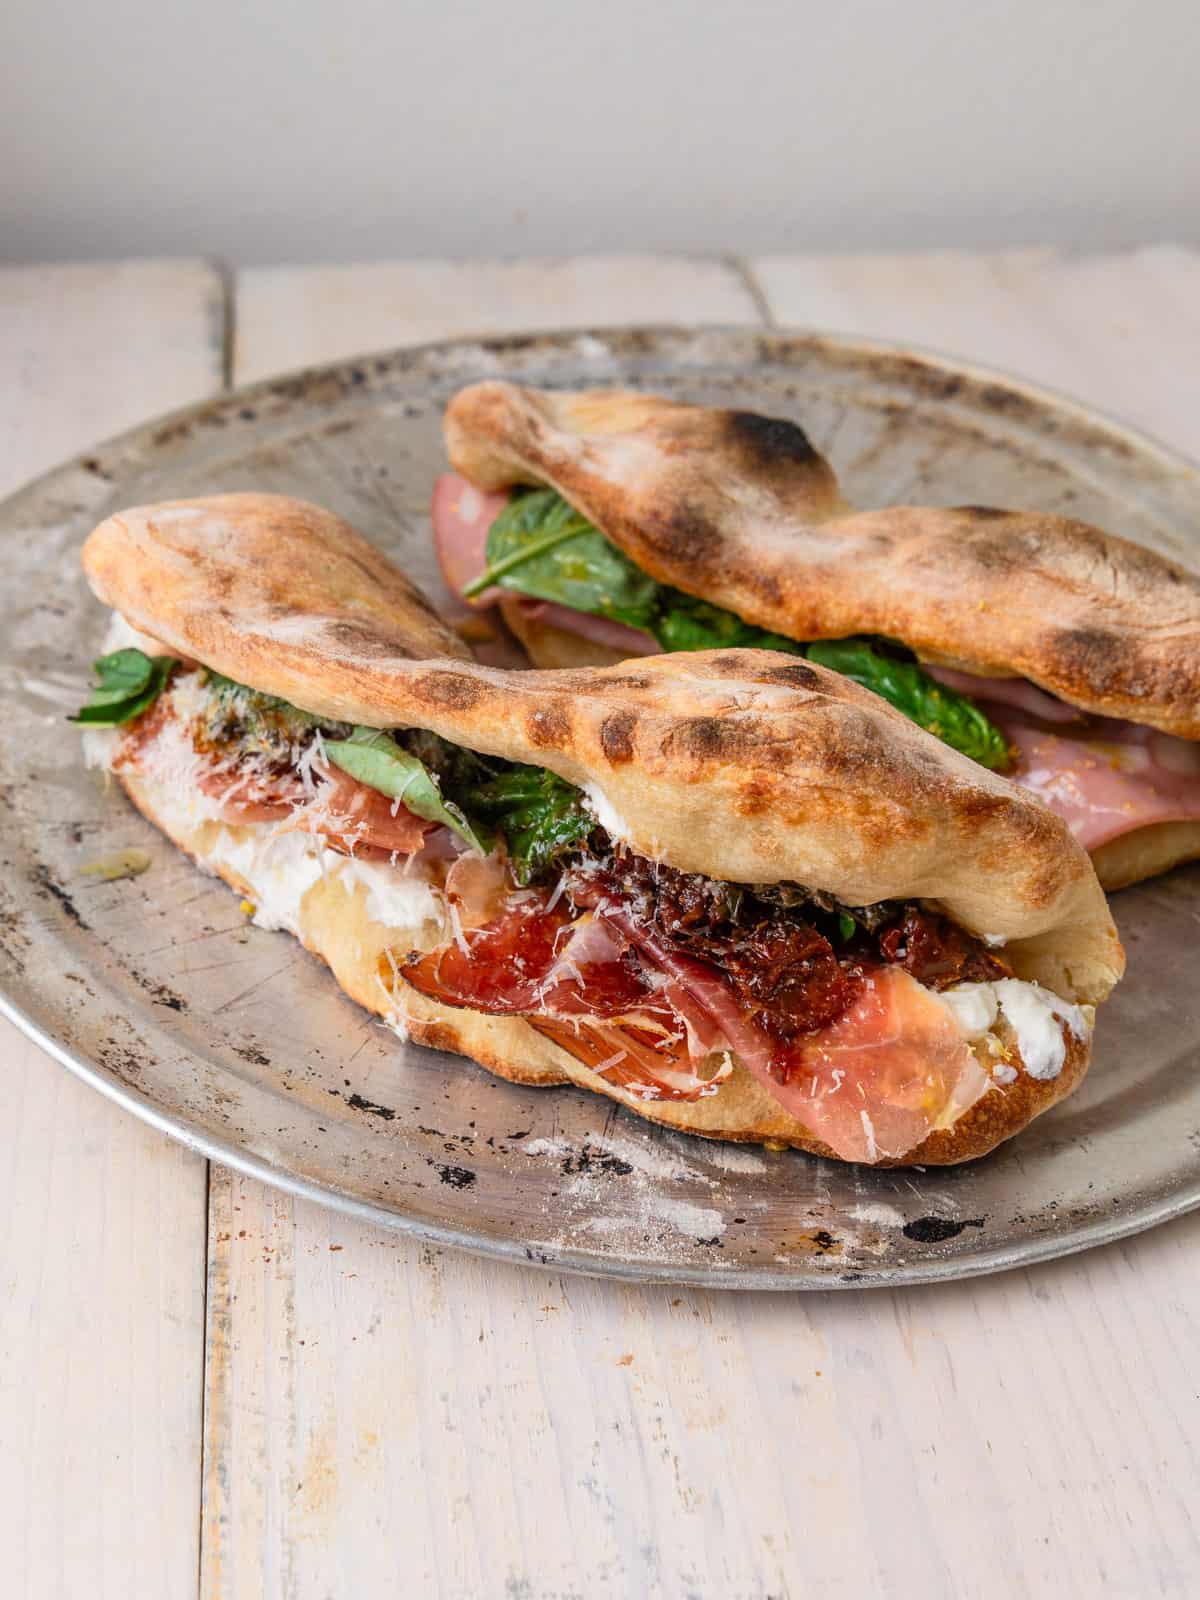 Pizza sandwich stuffed with creamy ricotta cheese, prosciutto and sundried tomatoes.